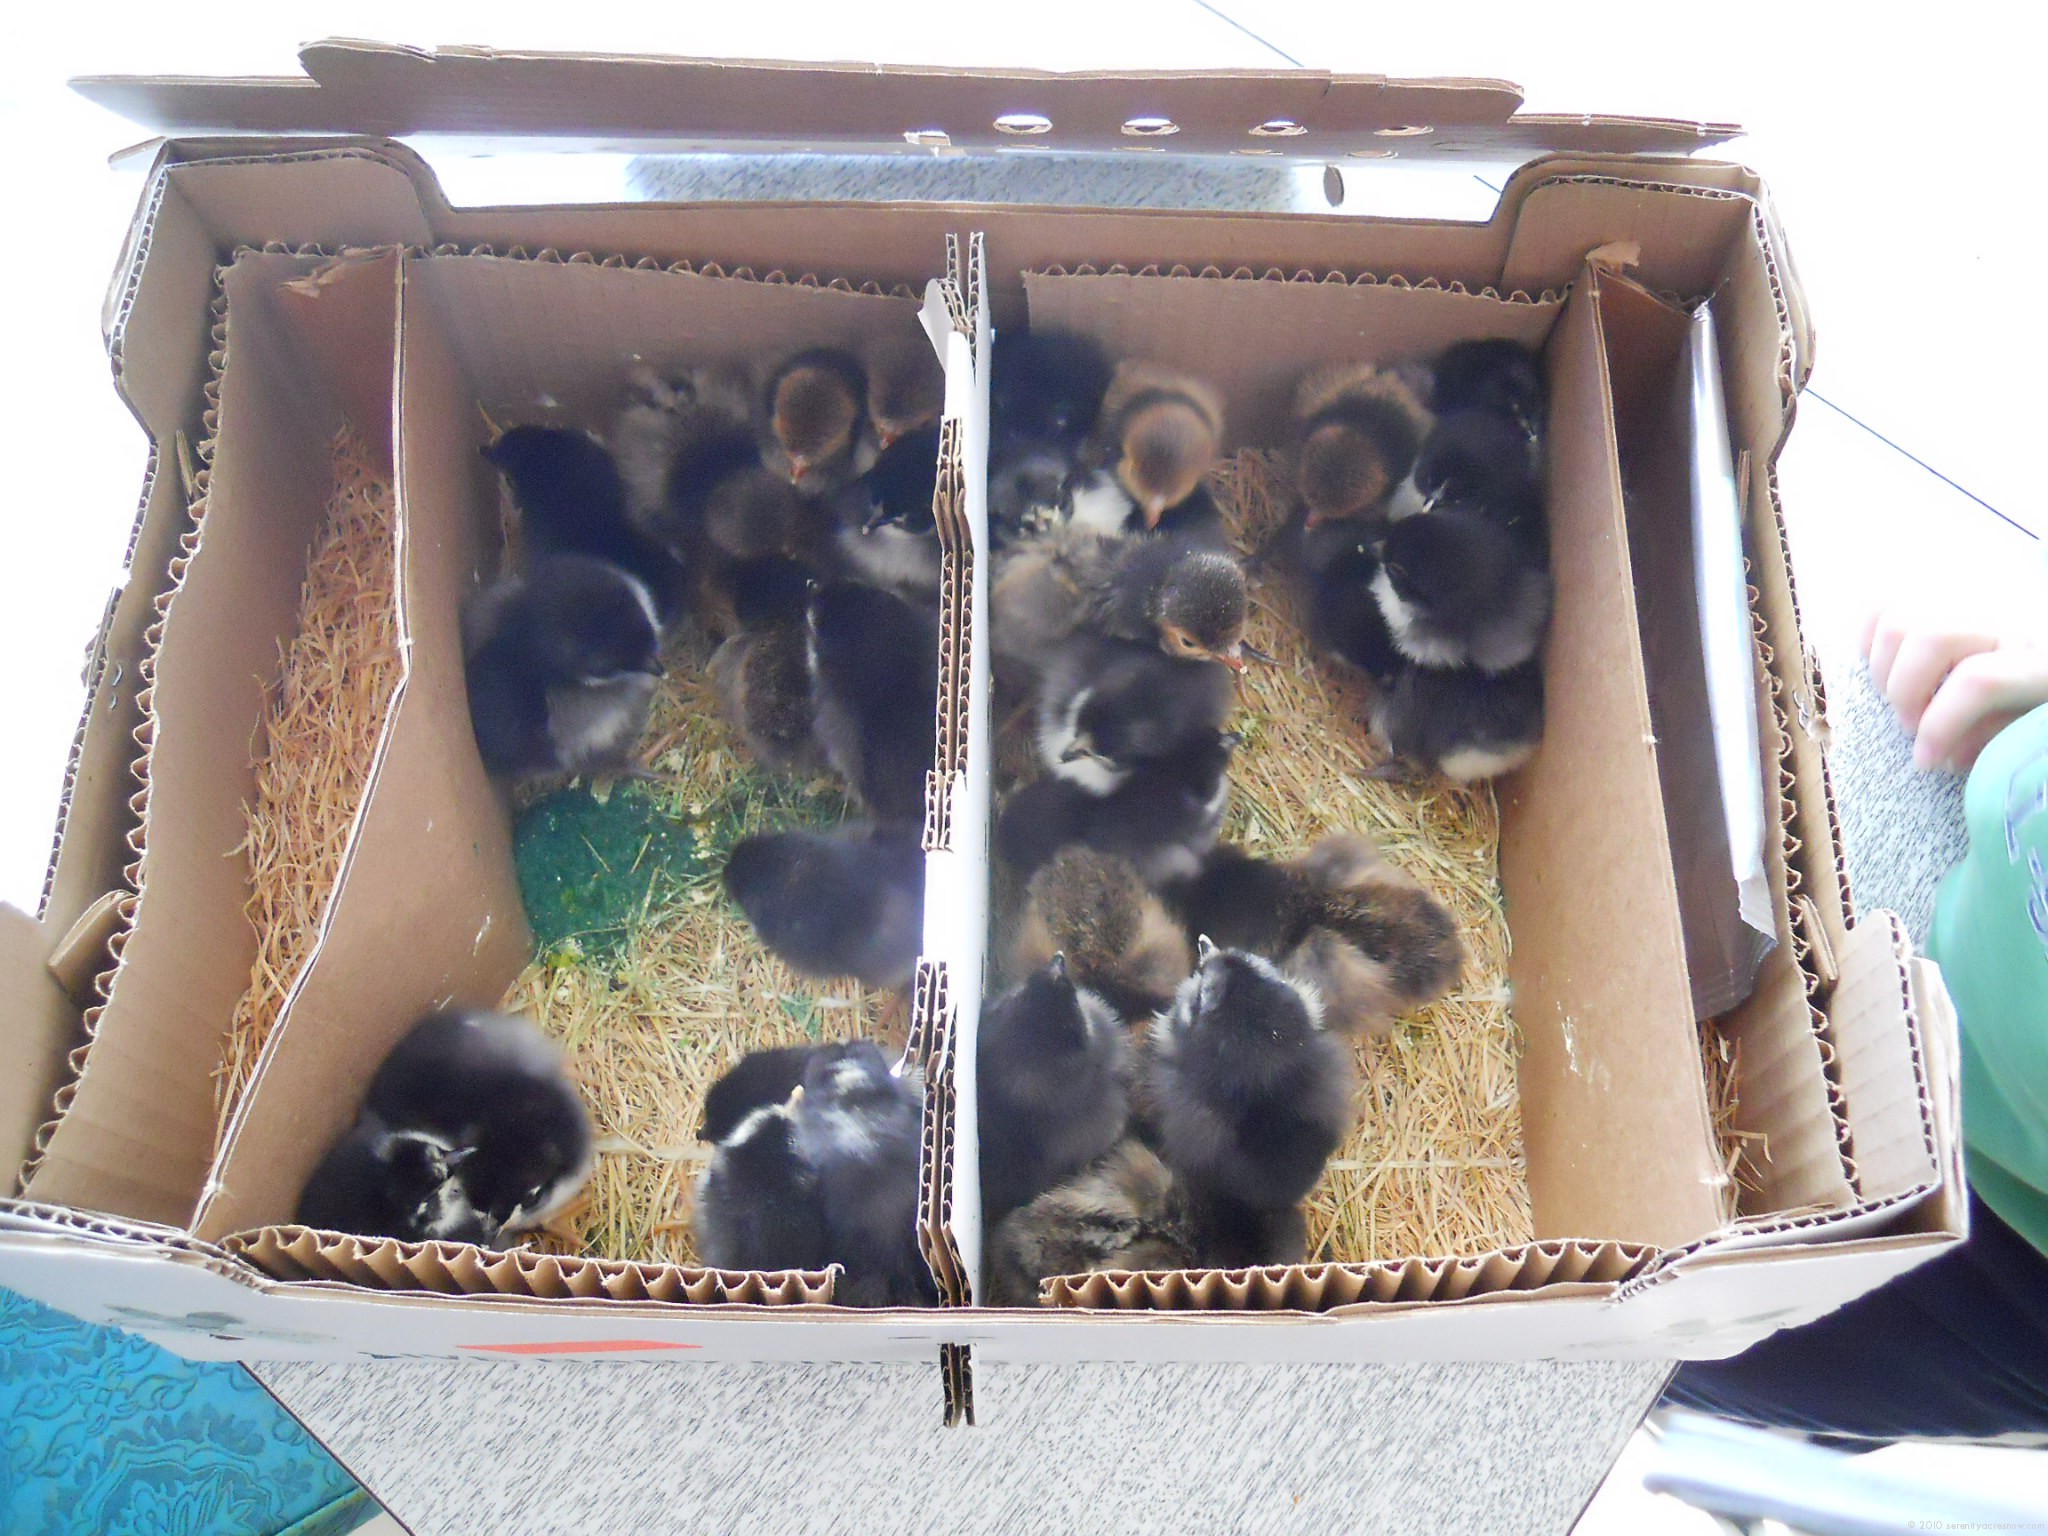 Hatching A Plan…To Grow Our Flock